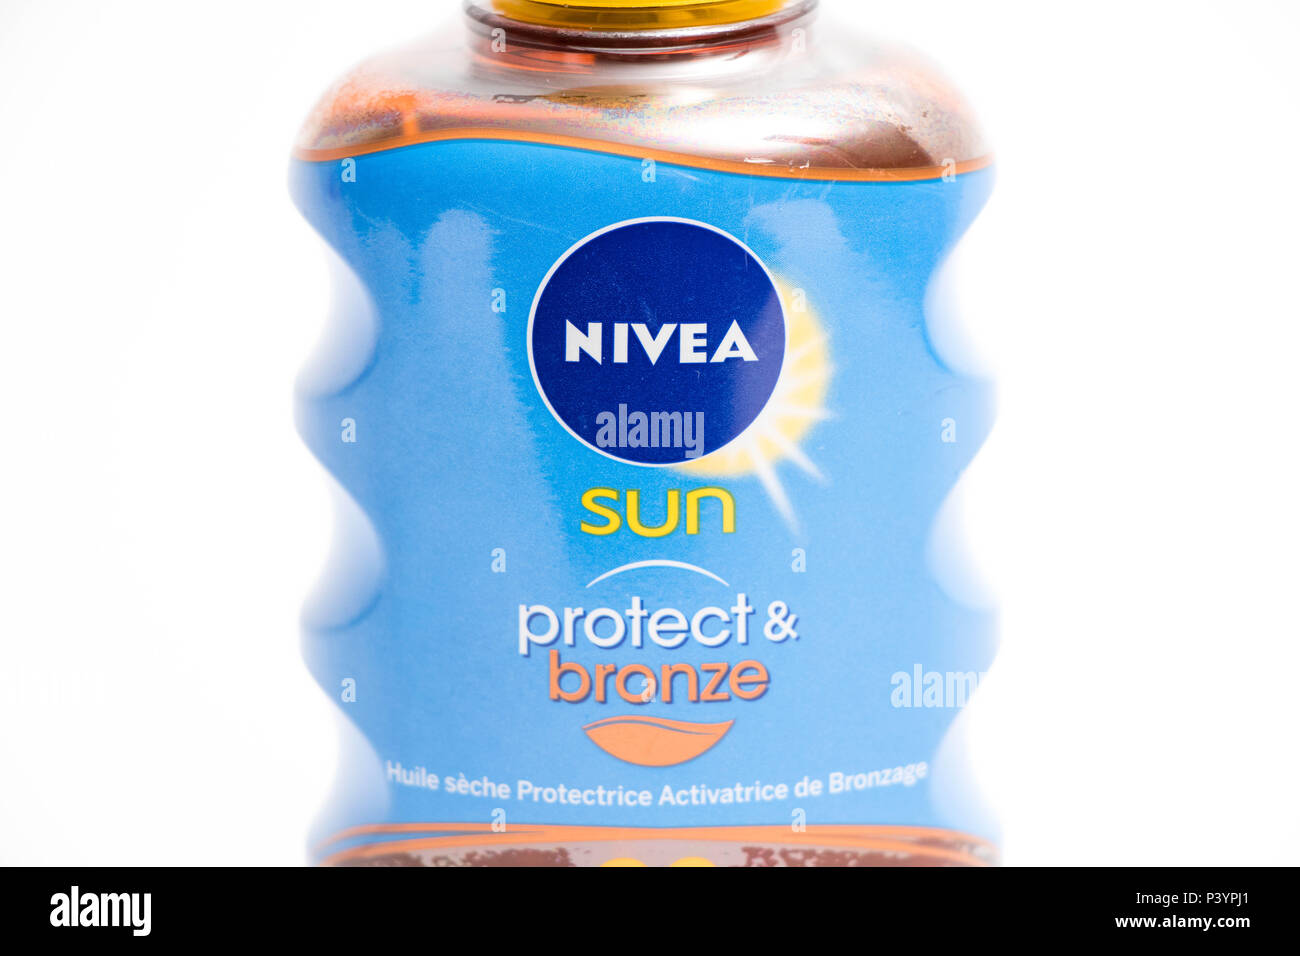 Nivea Sun Cream Resolution Stock Photography and Images - Alamy